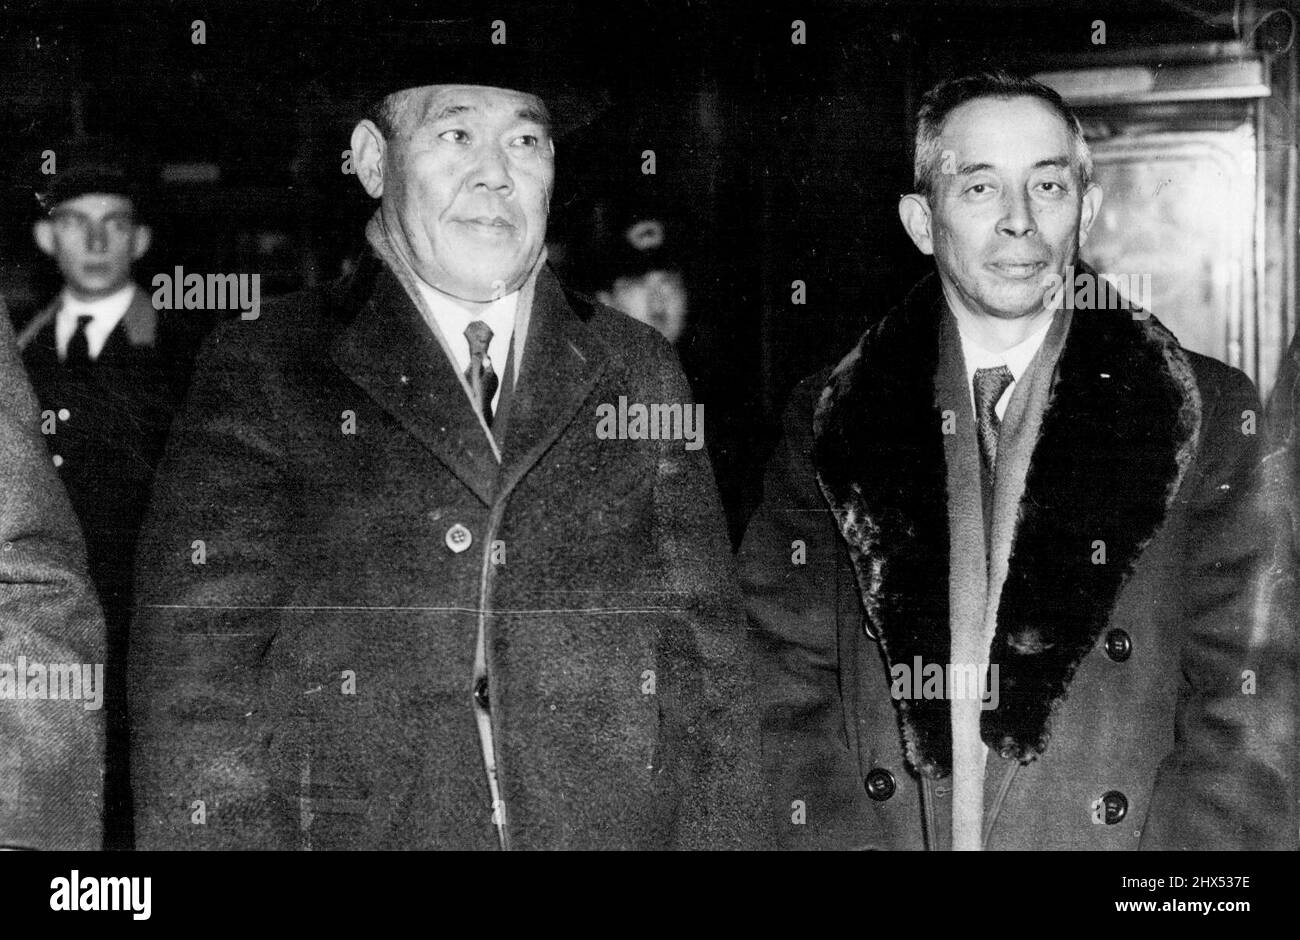 Japanese Naval Delegates Arrive -- Japan's delegation to the London Naval ***** which stars next Monday, arrived at Victoria *****. Admiral Osmai Nagano (left) head of ***** and Mr. Matsuzo Nagai (right), former ***** Ambassador to Berlin, photographed on *****. December 30, 1935. (Photo by Keystone) Stock Photo